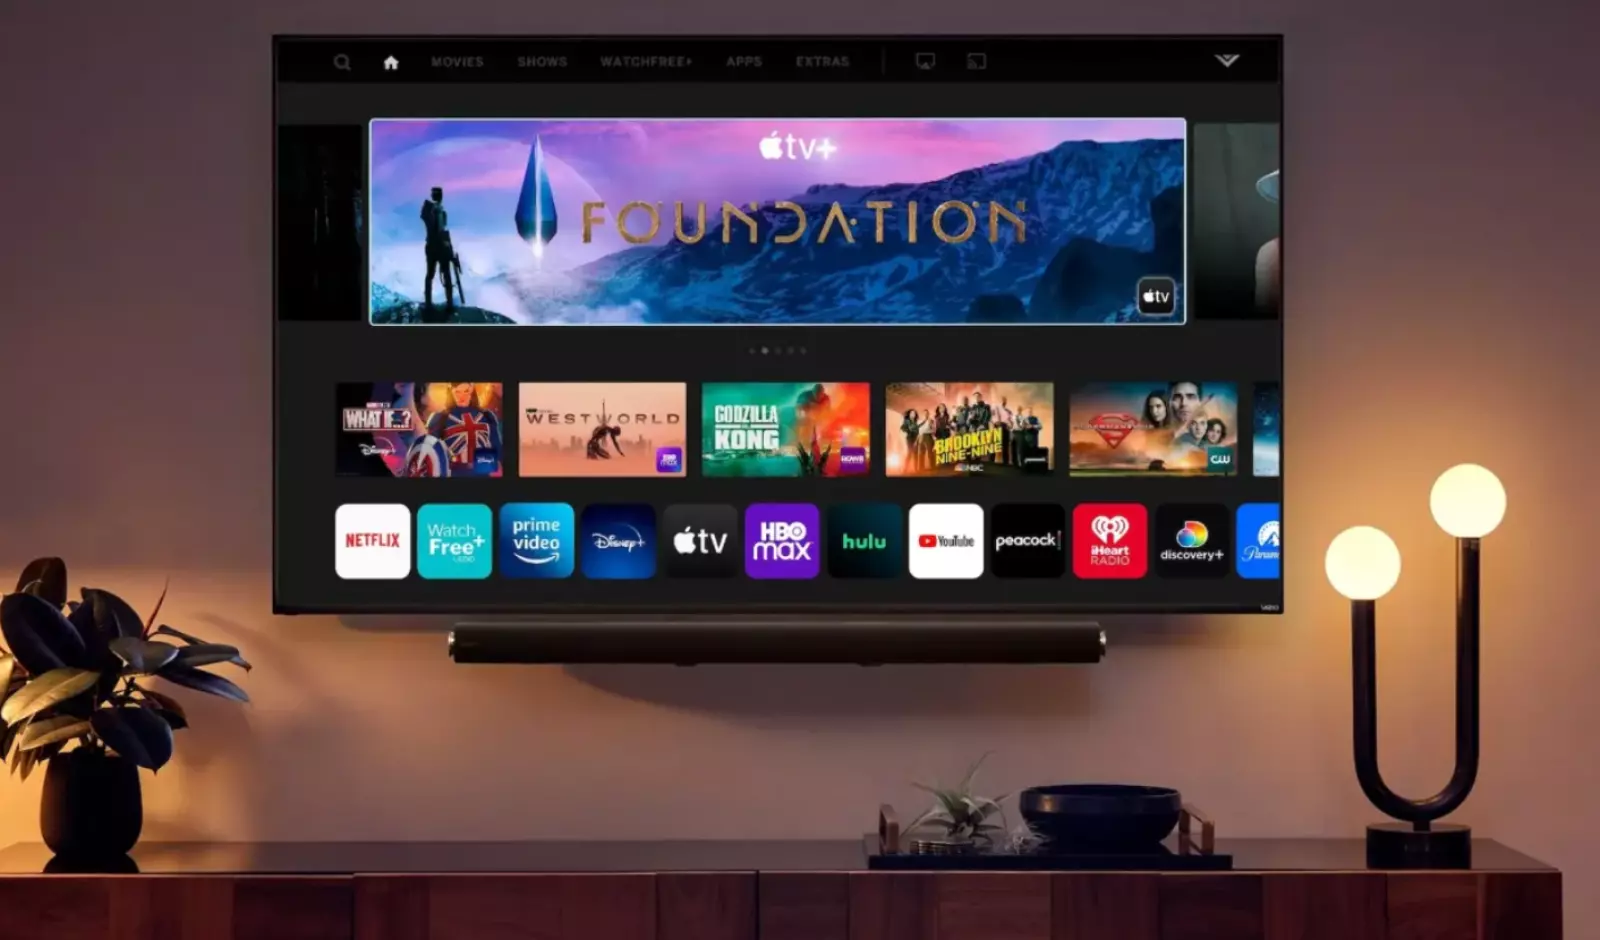 Vizio Opens Discussions to License Netcast to Fellow OEMs